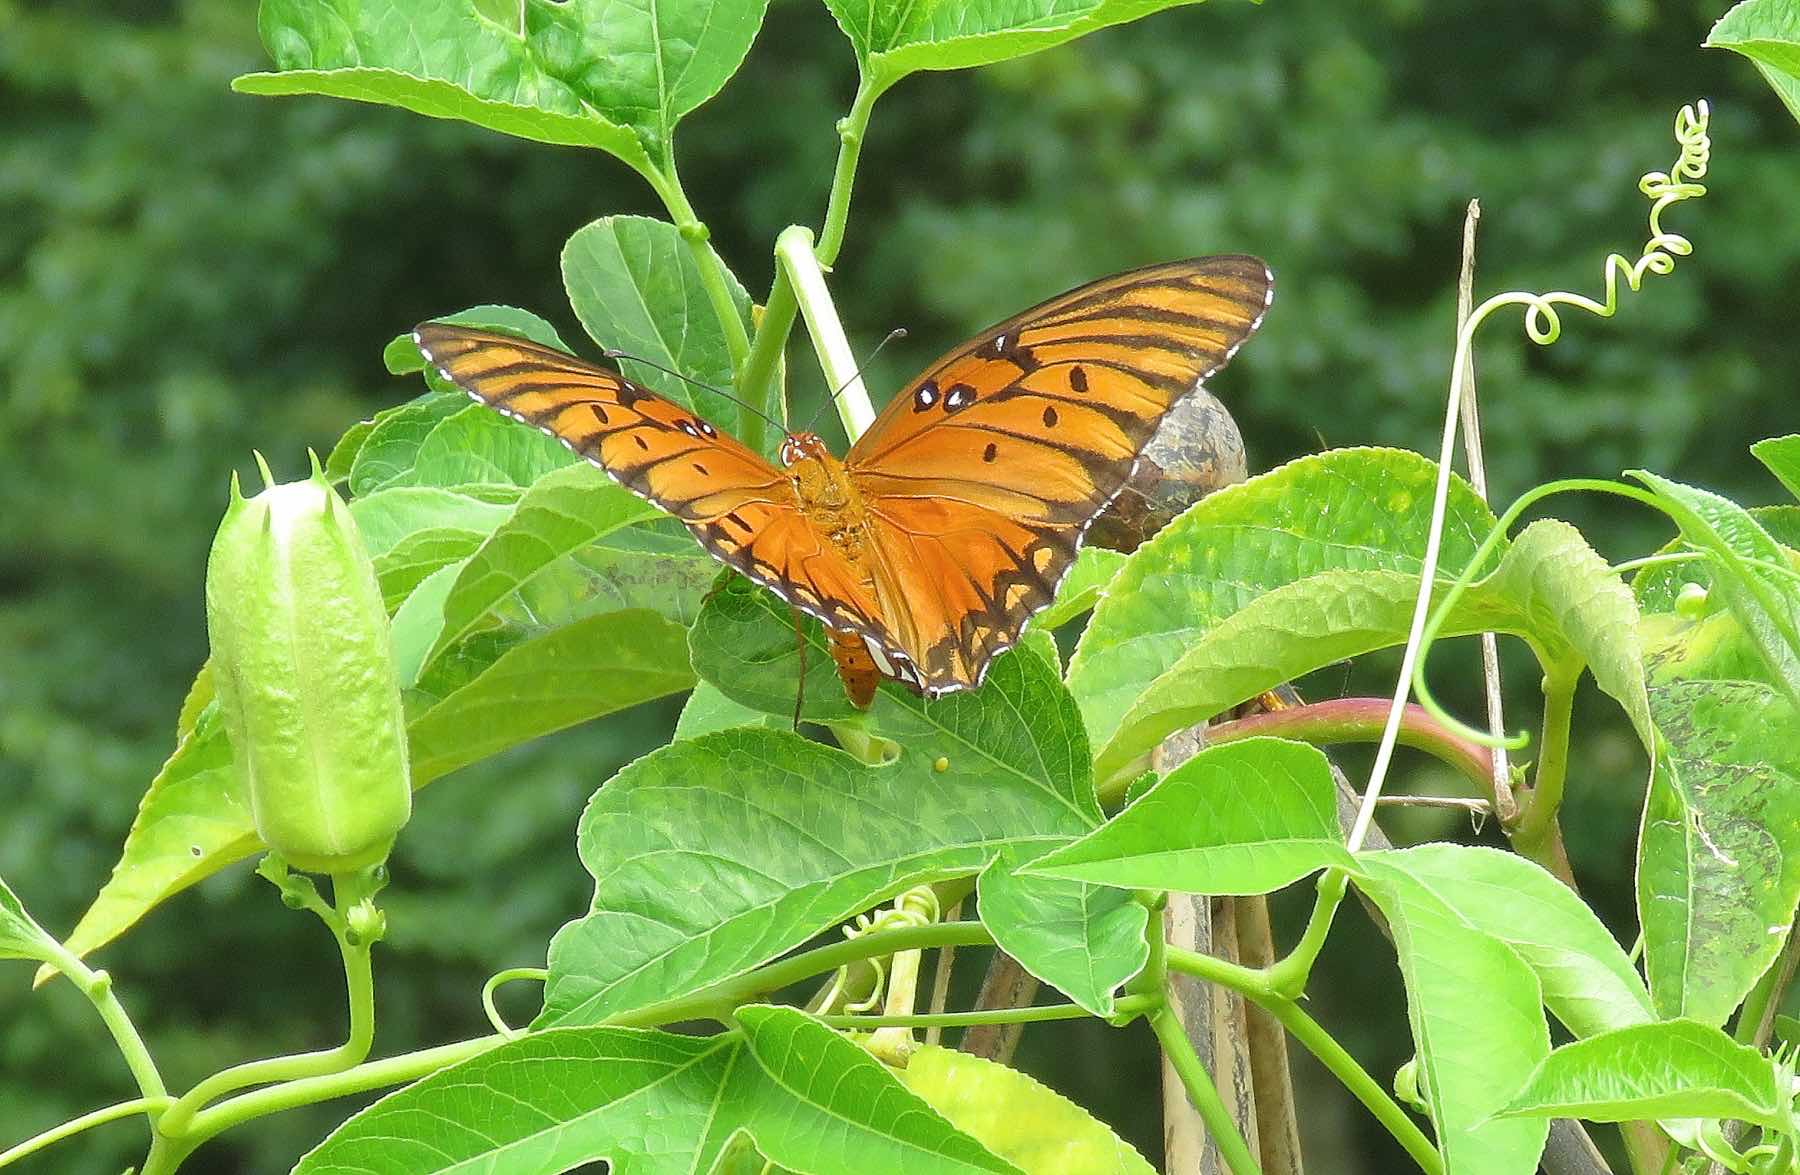 Female Gulf Fritillary Butterfly on Passion Vine laying eggs